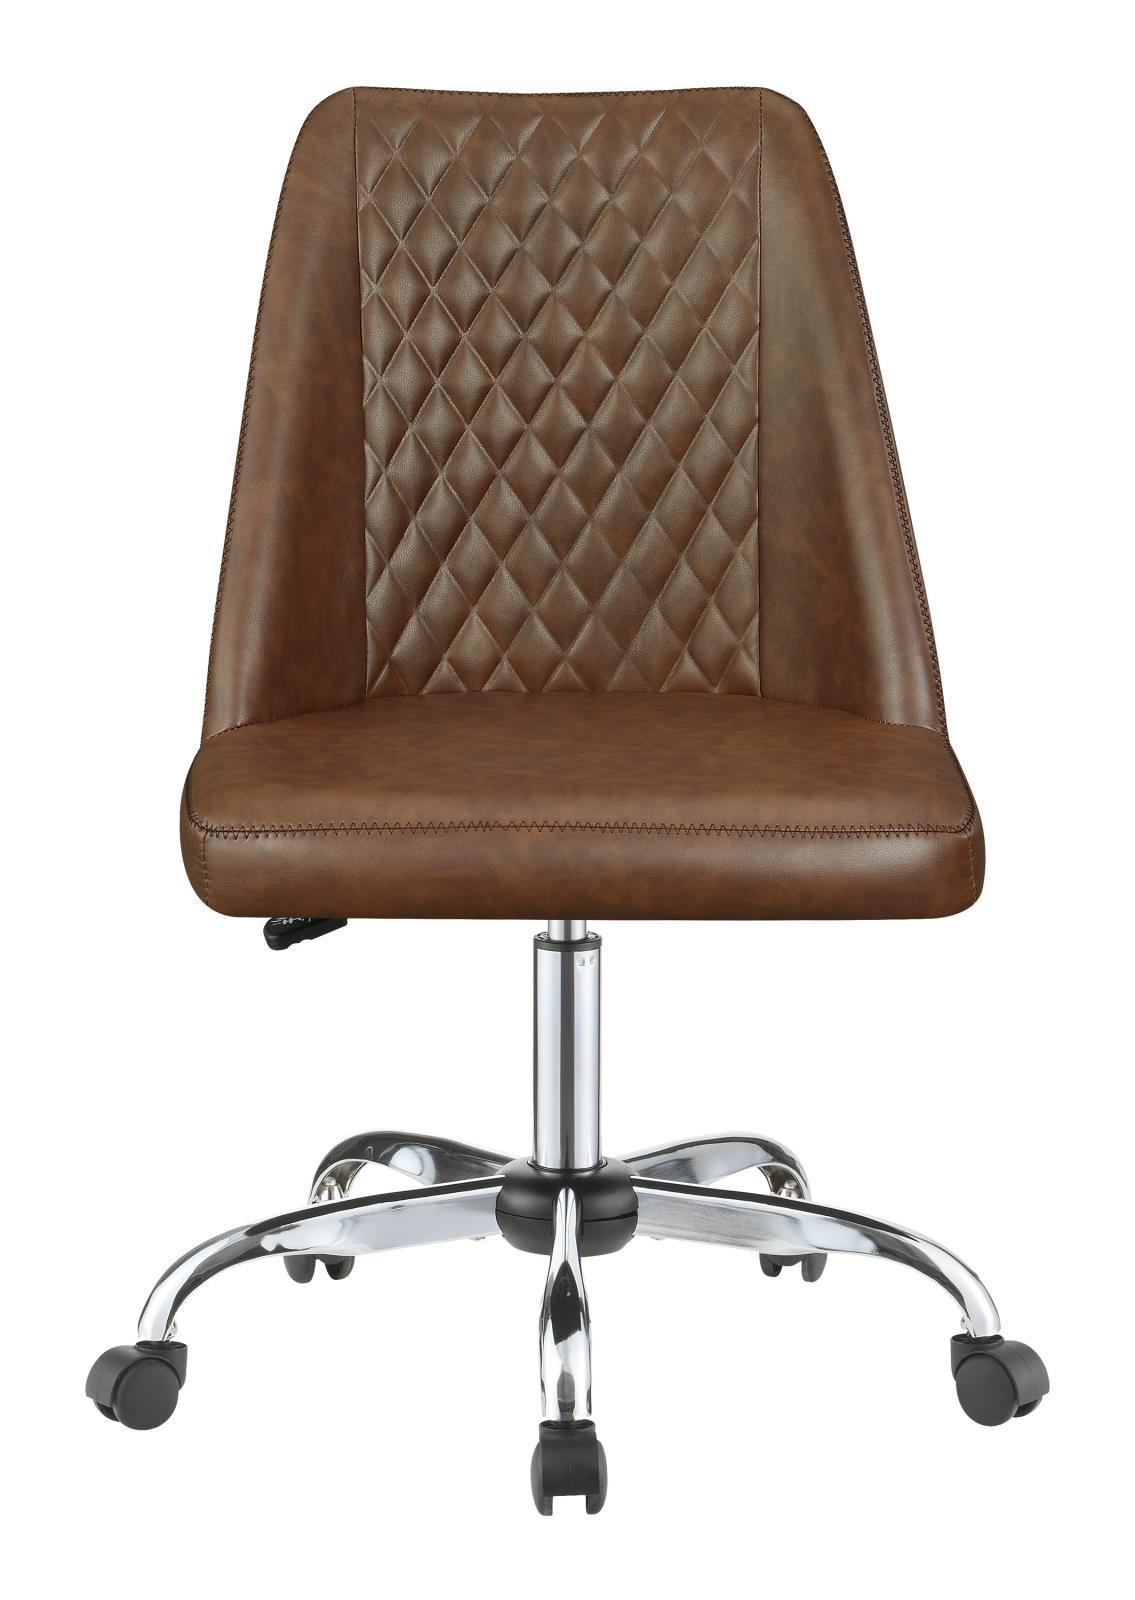 Althea Upholstered Tufted Back Office Chair Brown and Chrome - Half Price Furniture